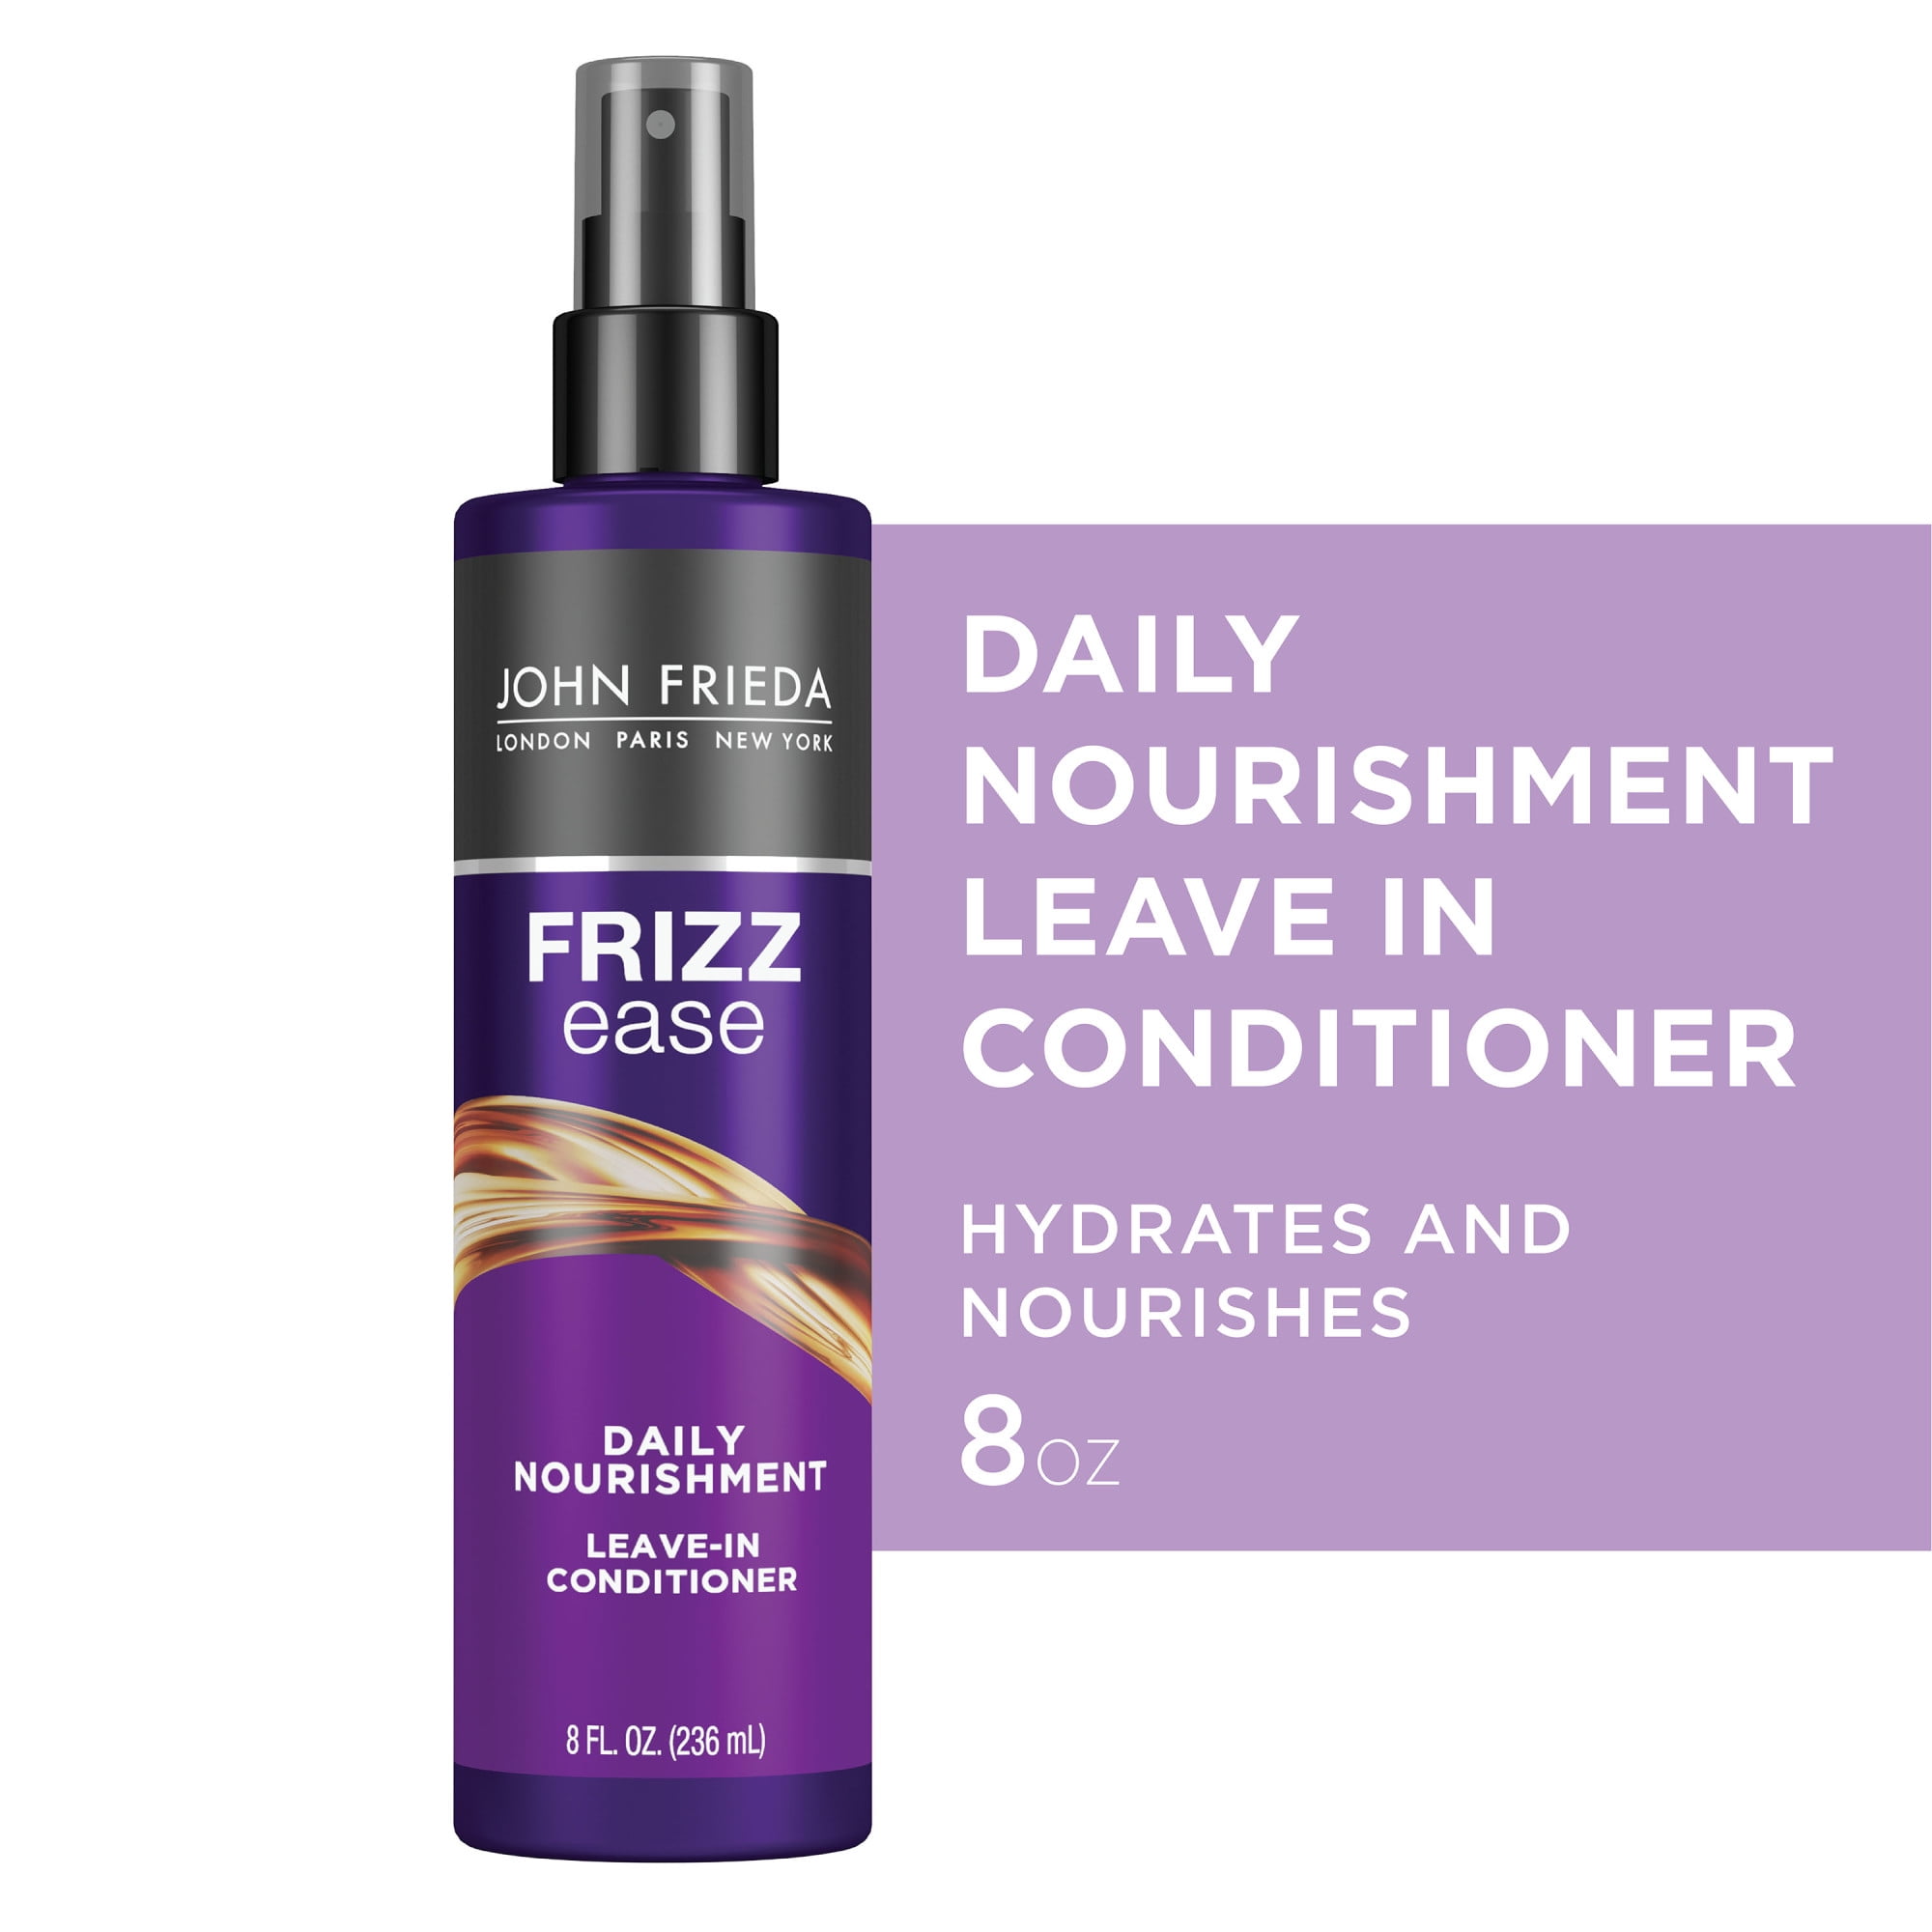 John Frieda Anti Frizz, Frizz Ease Daily Nourishment Leave In Conditioner  for Frizzy, Dry Hair, 8 fl oz 